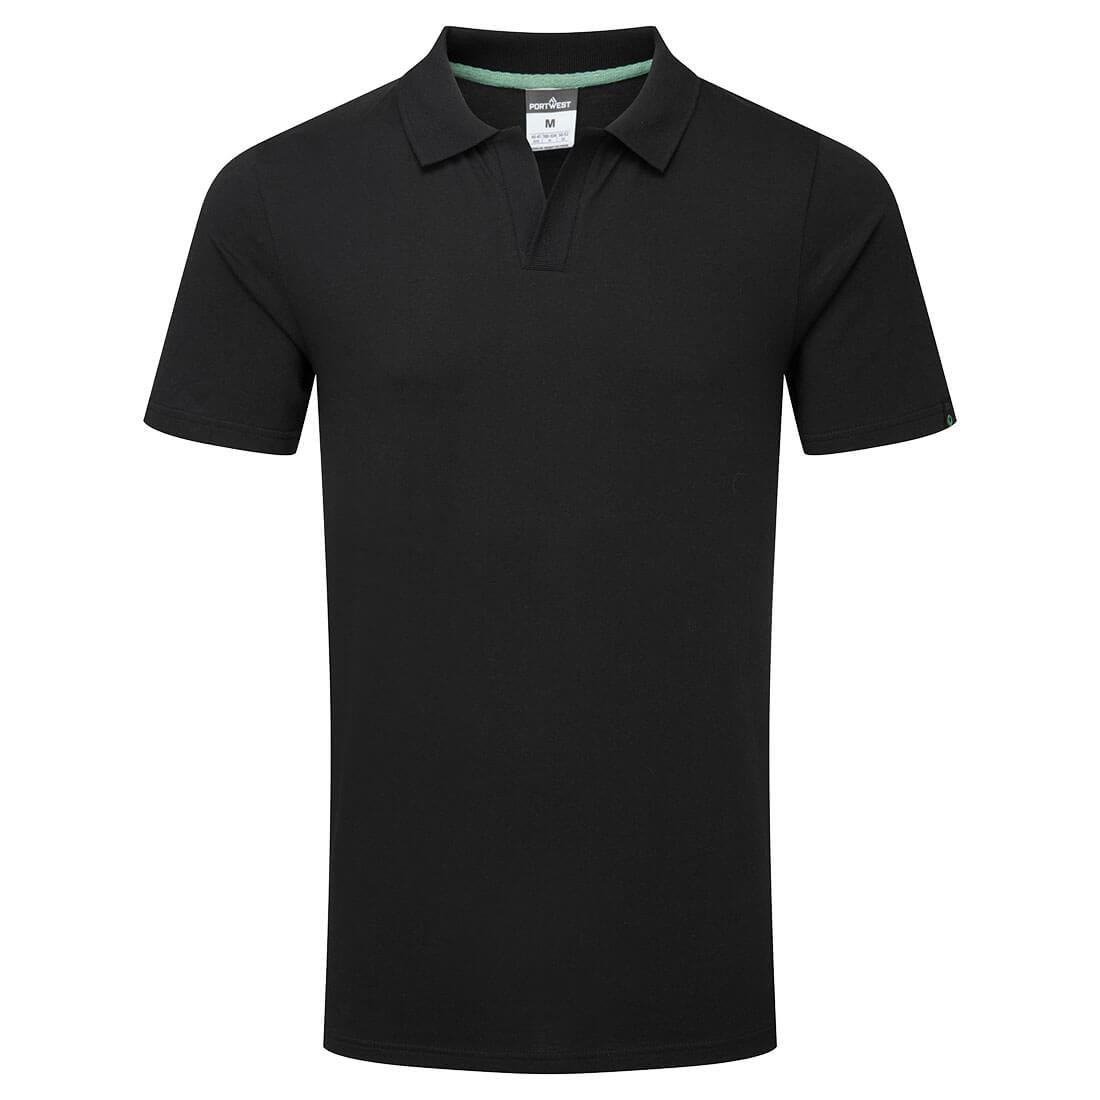 Organic Cotton Recyclable Polo Shirt - Safetywear